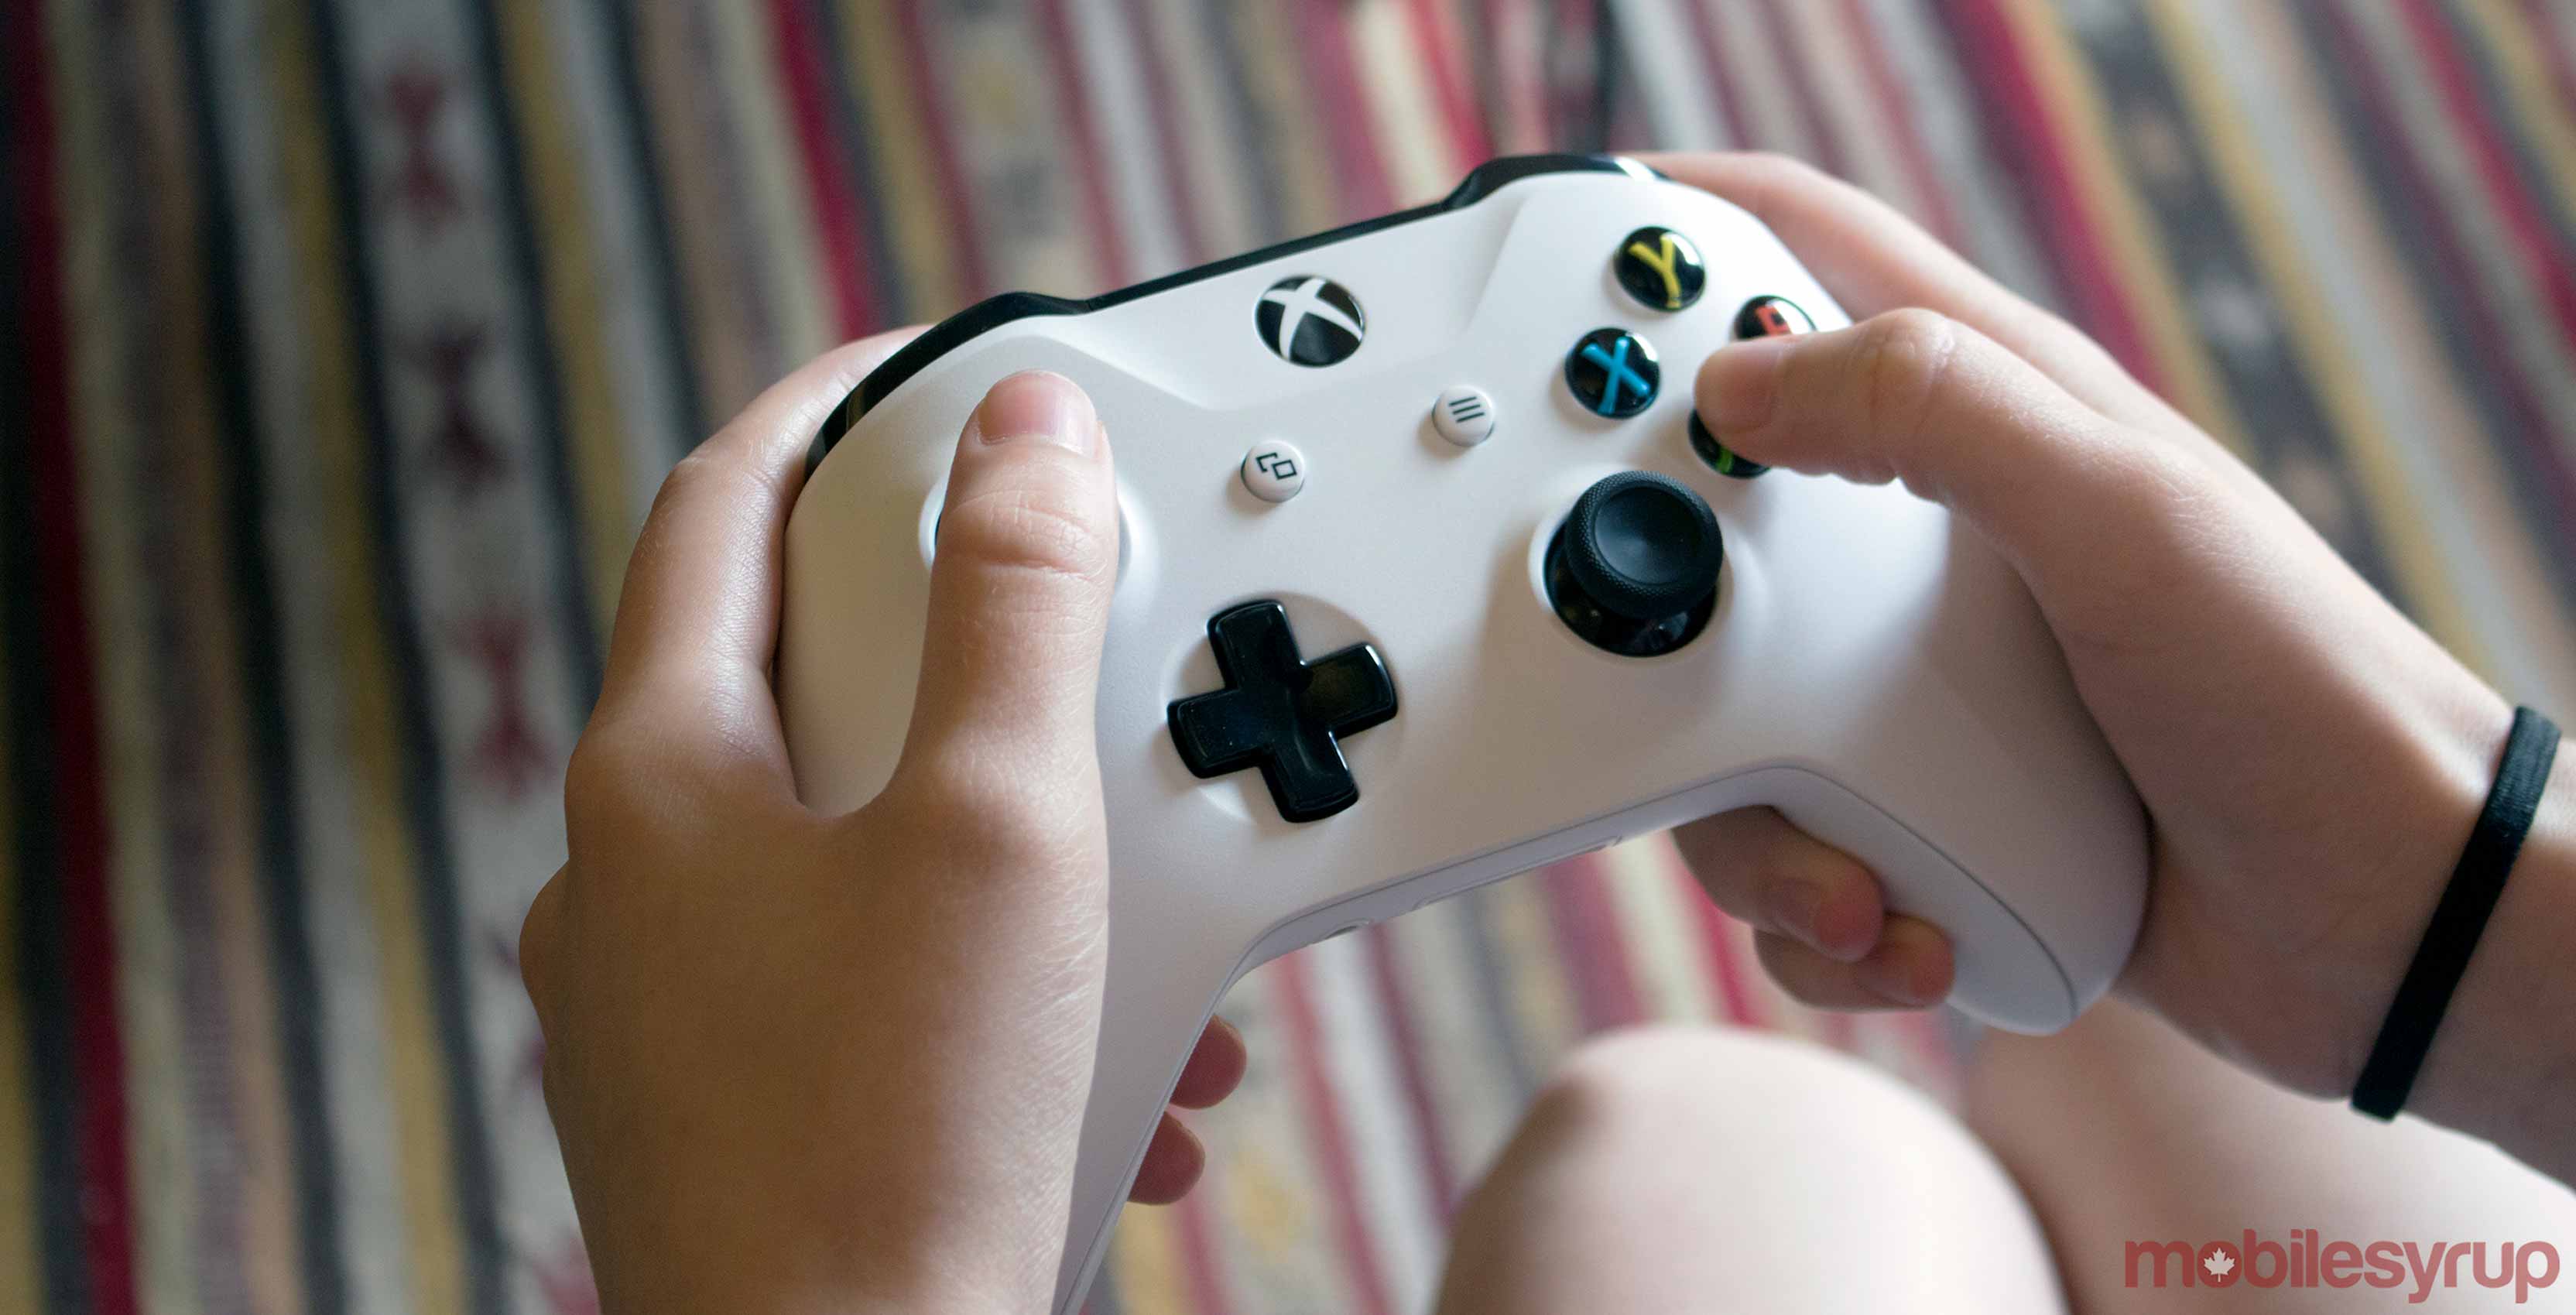 An image of a white Xbox One controller